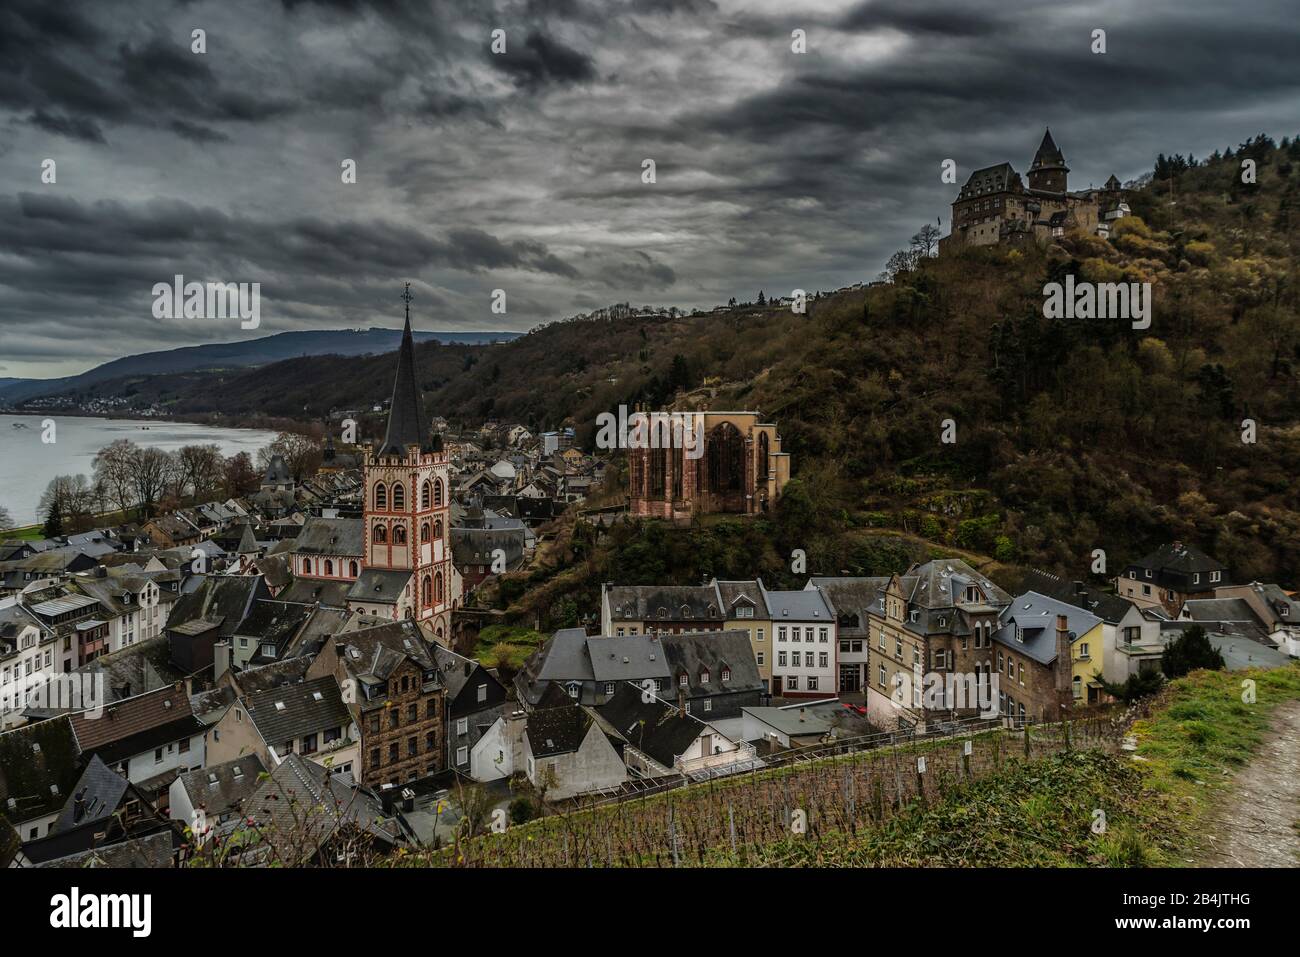 Bacharach on the Middle Rhine, dark and eerie, or romantic scary-beautiful version, evokes memories of gloomy medieval times, prominent church of St. Peter, the Werner Chapel and Castle Stahleck, part of the 'Unesco World Heritage Upper Middle Rhine Valley, Stock Photo